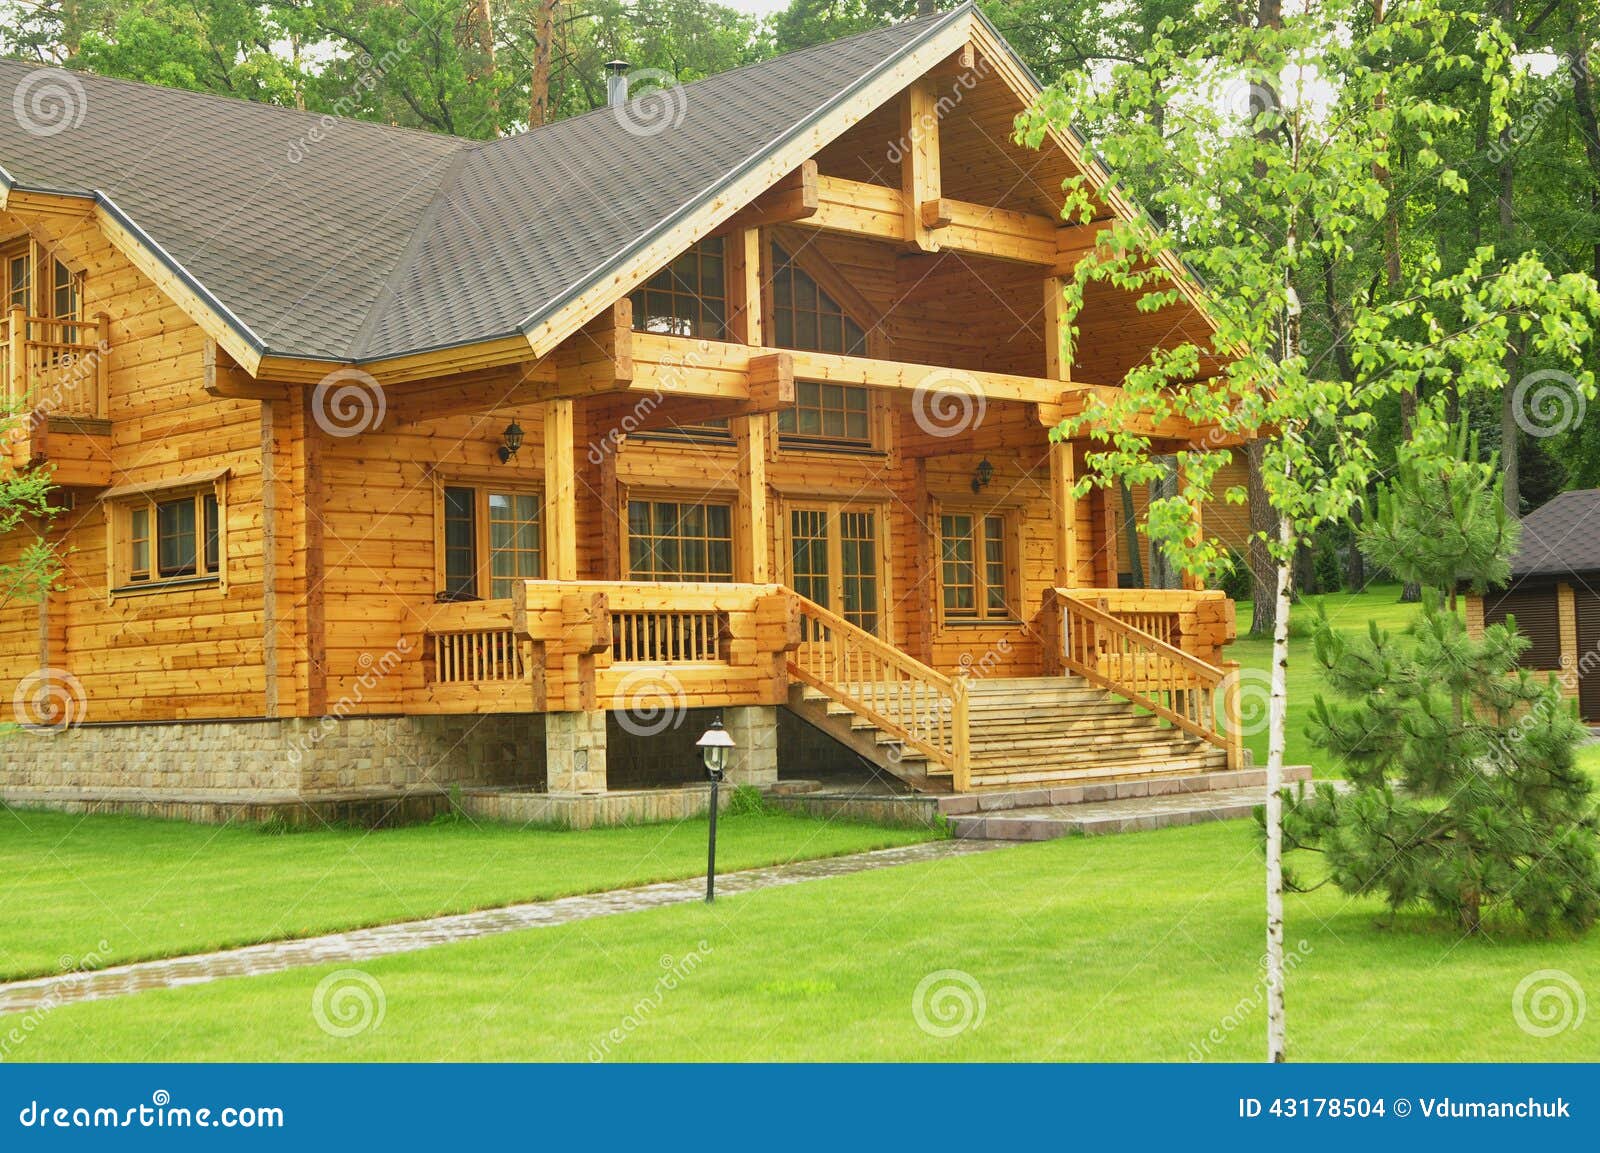 Beautiful Wooden House In The Forest Stock Photo - Image 